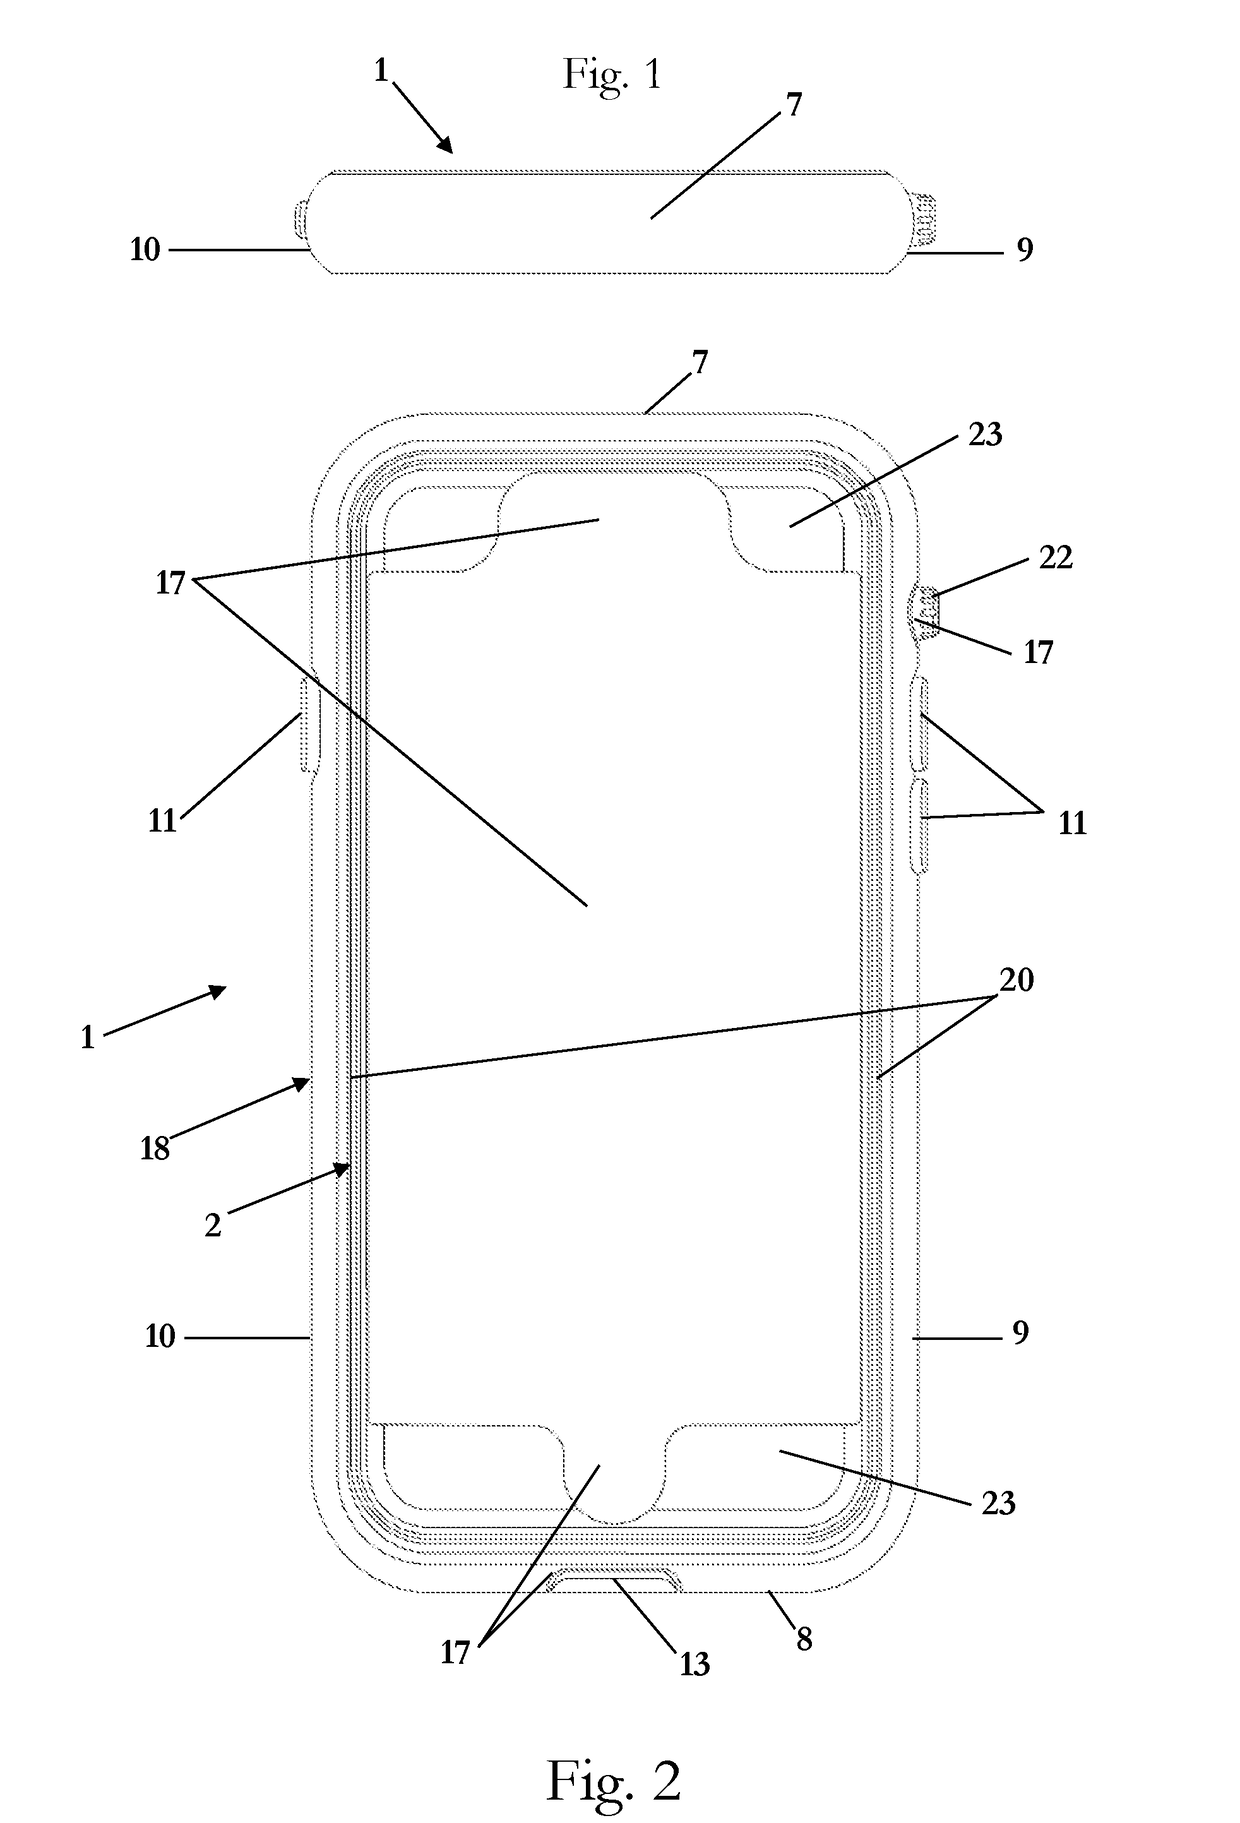 Dual-Layer Bumper for a Case for a Mobile Device